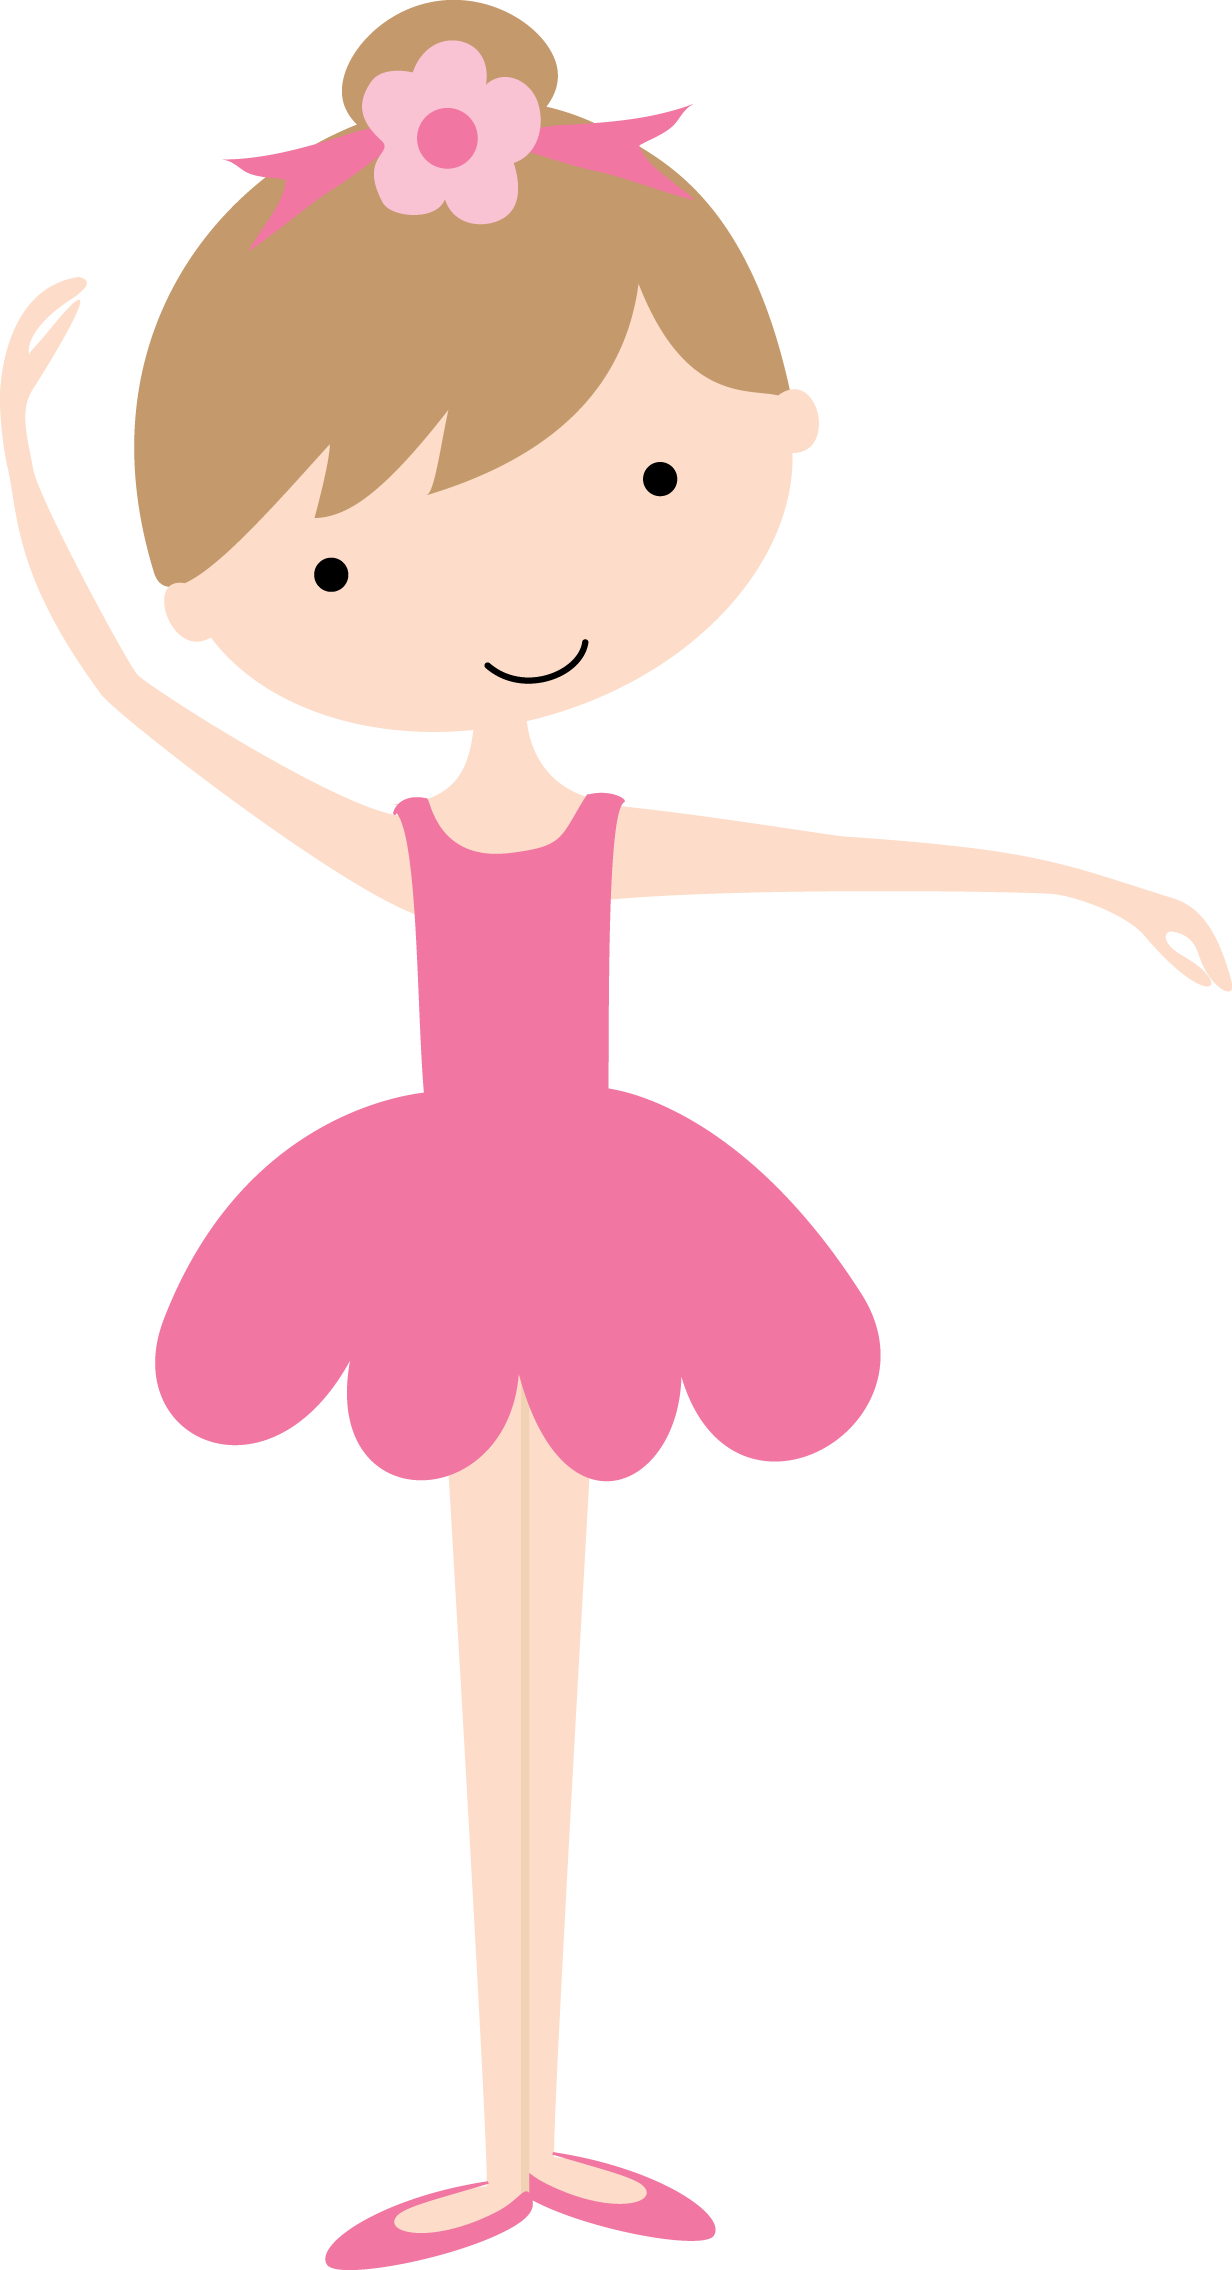 Free Ballerina Transparent Download Free Ballerina Transparent Png Images Free Cliparts On Clipart Library